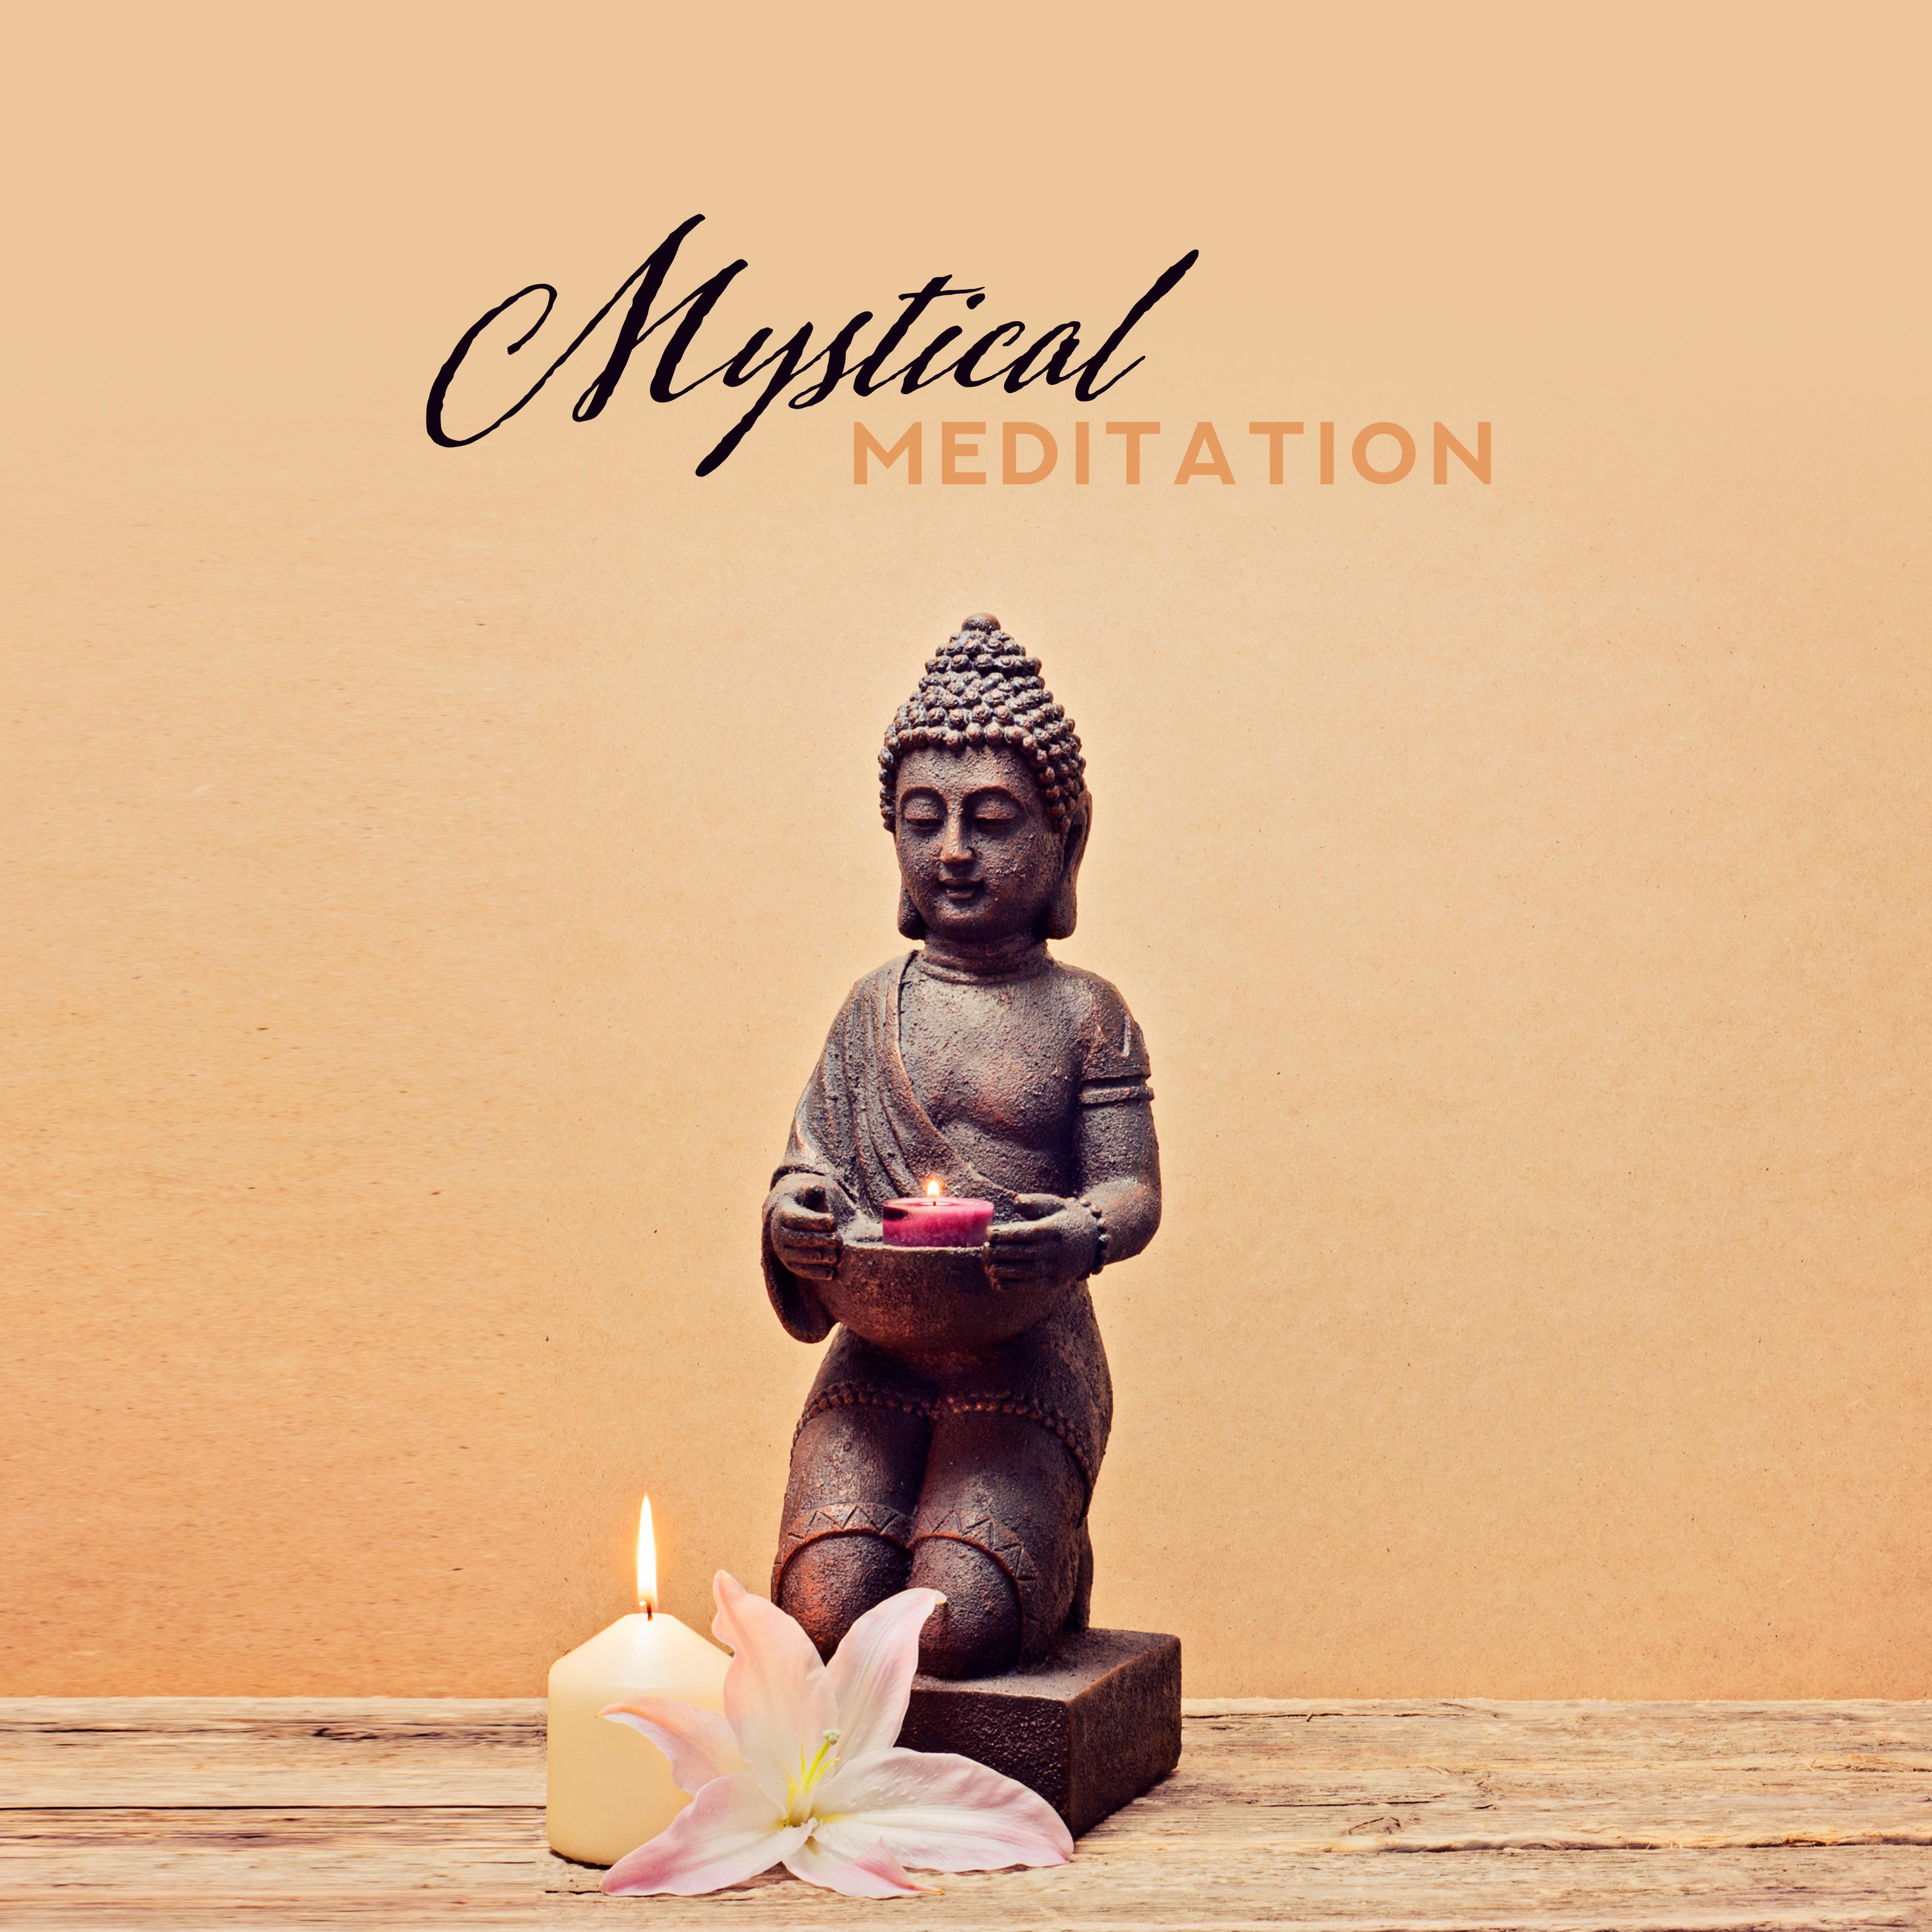 Mystical Meditation: Yoga Practice, Inner Balance, Harmony Zen Lounge, Meditation Therapy, Ambient Music, Deep Meditation, Music Zone, Spiritual Melodies to Calm Down